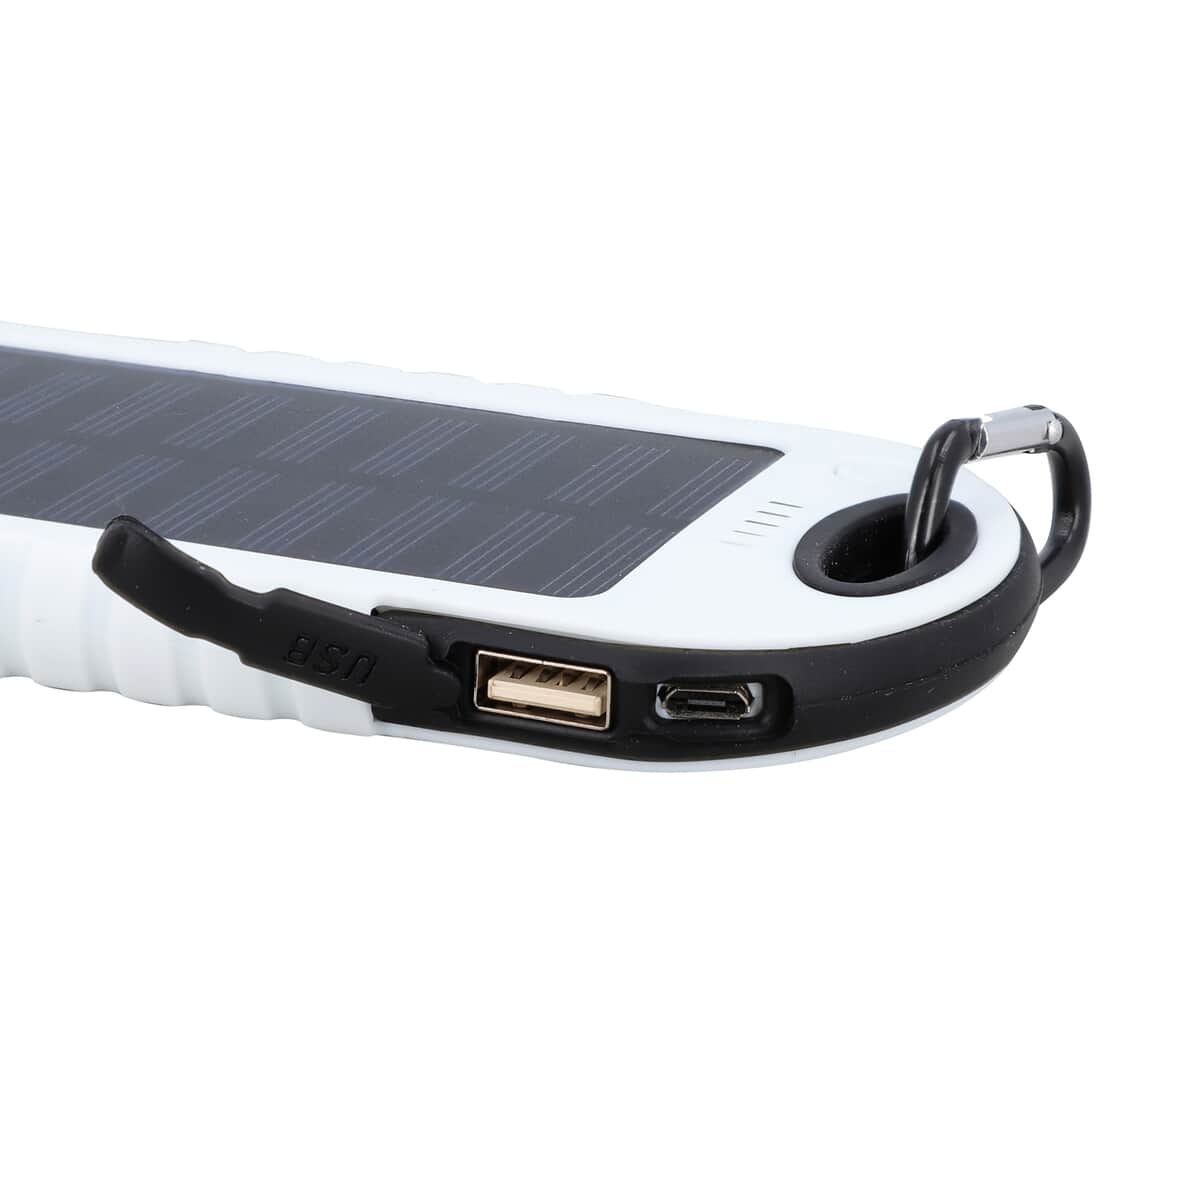 Homesmart White Carabiner Solar 5000 mAh Battery Charger with USB & Emergency LED Flash Light image number 4